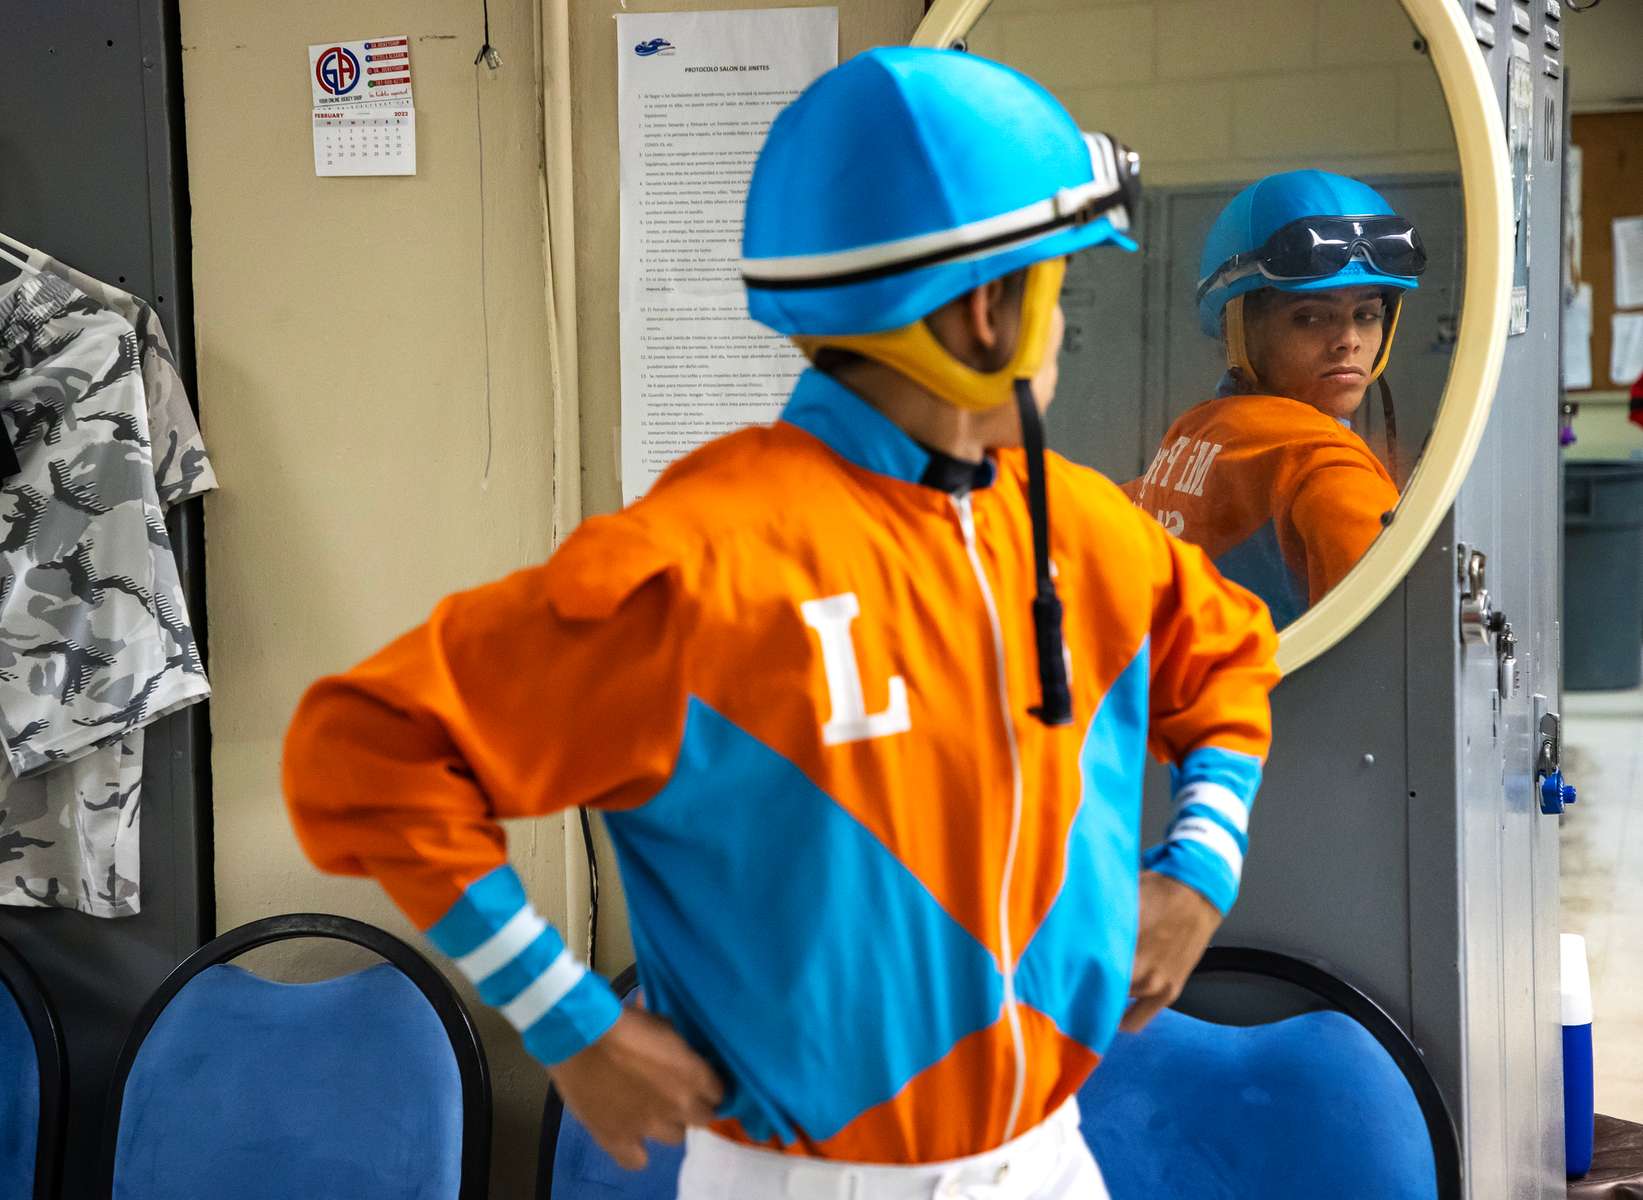 Student Jockey Bryan Torres looks at himself in the mirror in preparation for his race at the Vocational Equestrian Agustín Mercado Reverón School located in the Hipódromo Camarero on November 18, 2022 in Canovanas, Puerto Rico. The Vocational Equestrian Agustín Mercado Reverón School has produced some of the best jockeys in the world but also prepares students for a wide range of equestrian jobs on a tuition-free basis. 